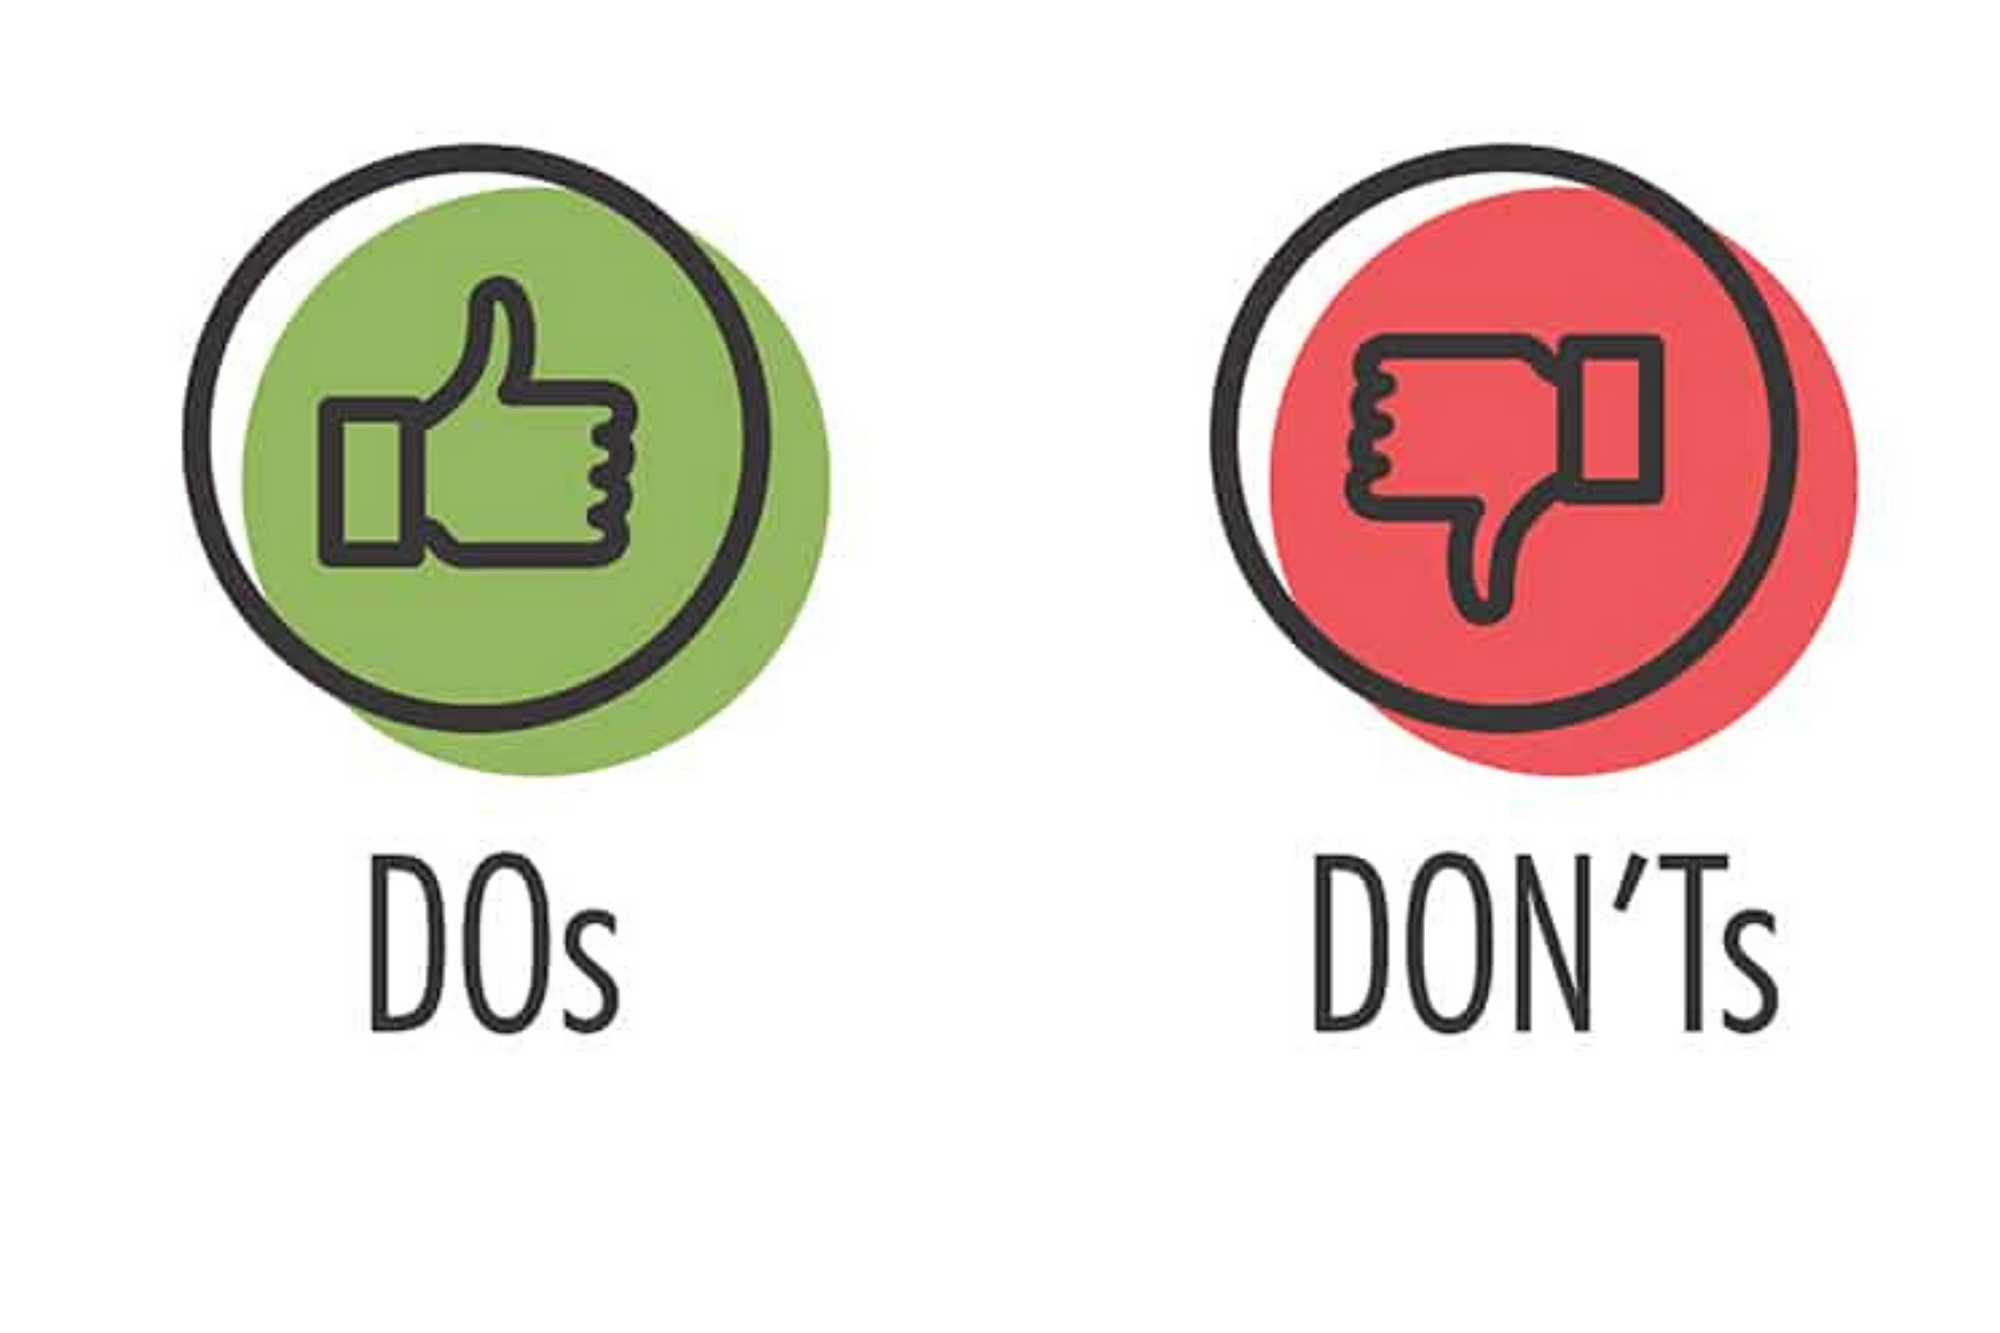 S o s лайк. Do and donts. Dos and don'TS. Dont и donts. Dos and don'TS logo.